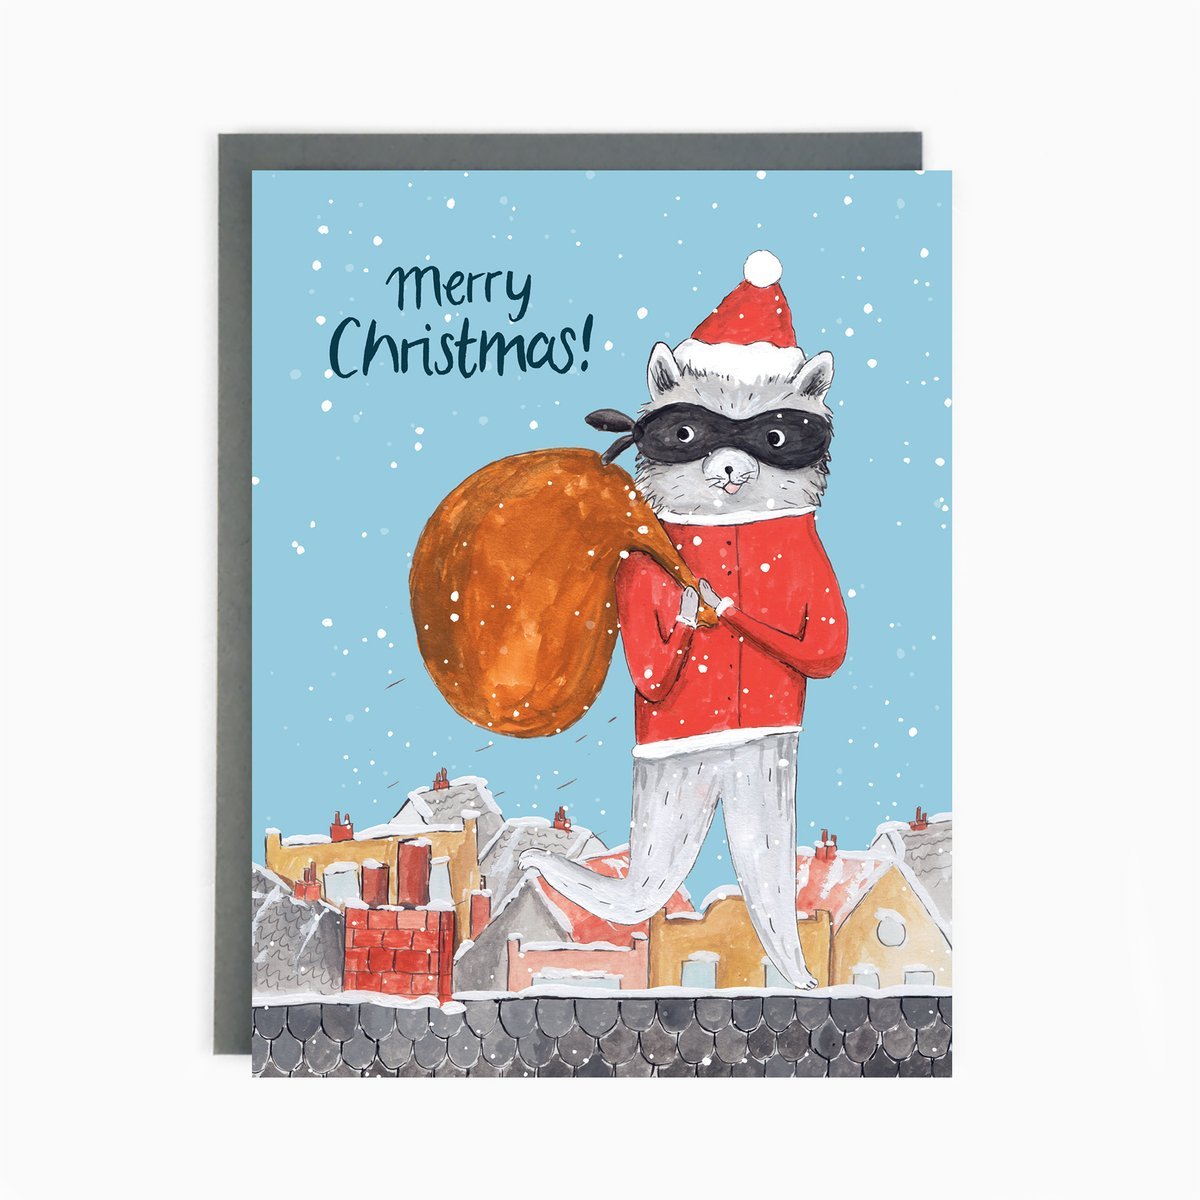 Christmas Critter Collection Boxed Cards